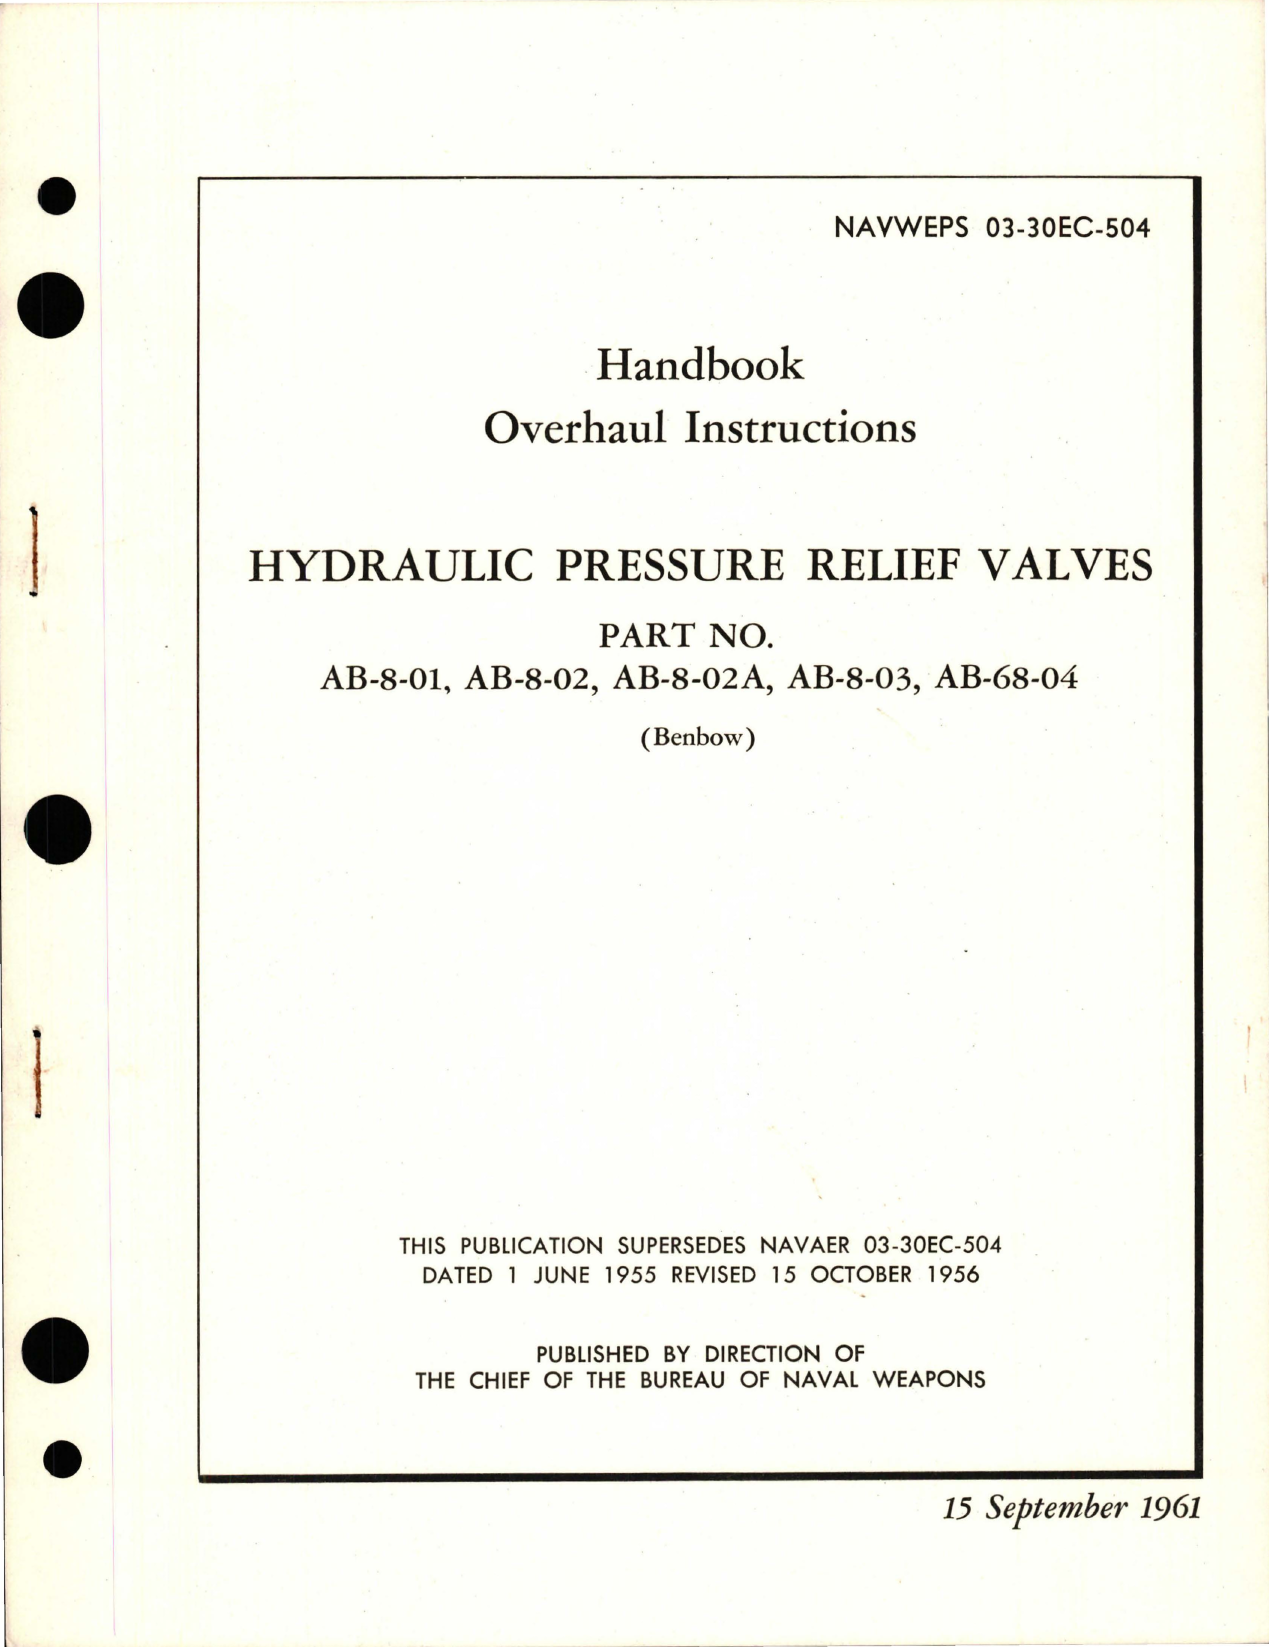 Sample page 1 from AirCorps Library document: Overhaul Instructions for Hydraulic Pressure Relief Valves - Parts AB-8-01, AB-8-02, AB-8-02A, AB-8-03, and AB-68-04